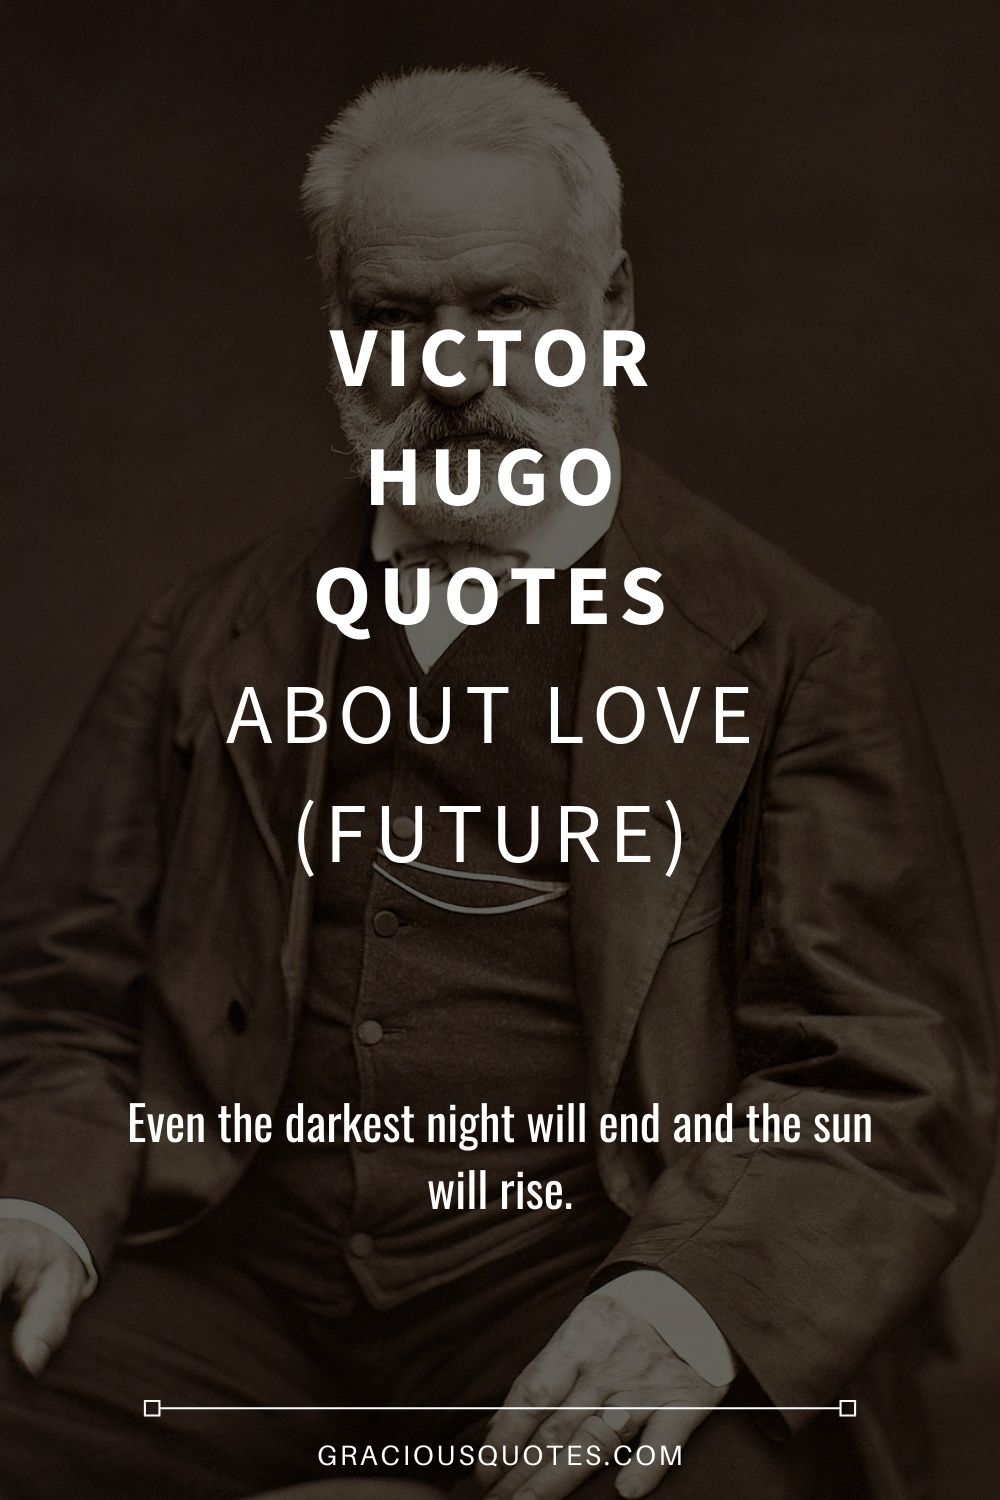 Victor Hugo Quotes About Love (FUTURE) - Gracious Quotes